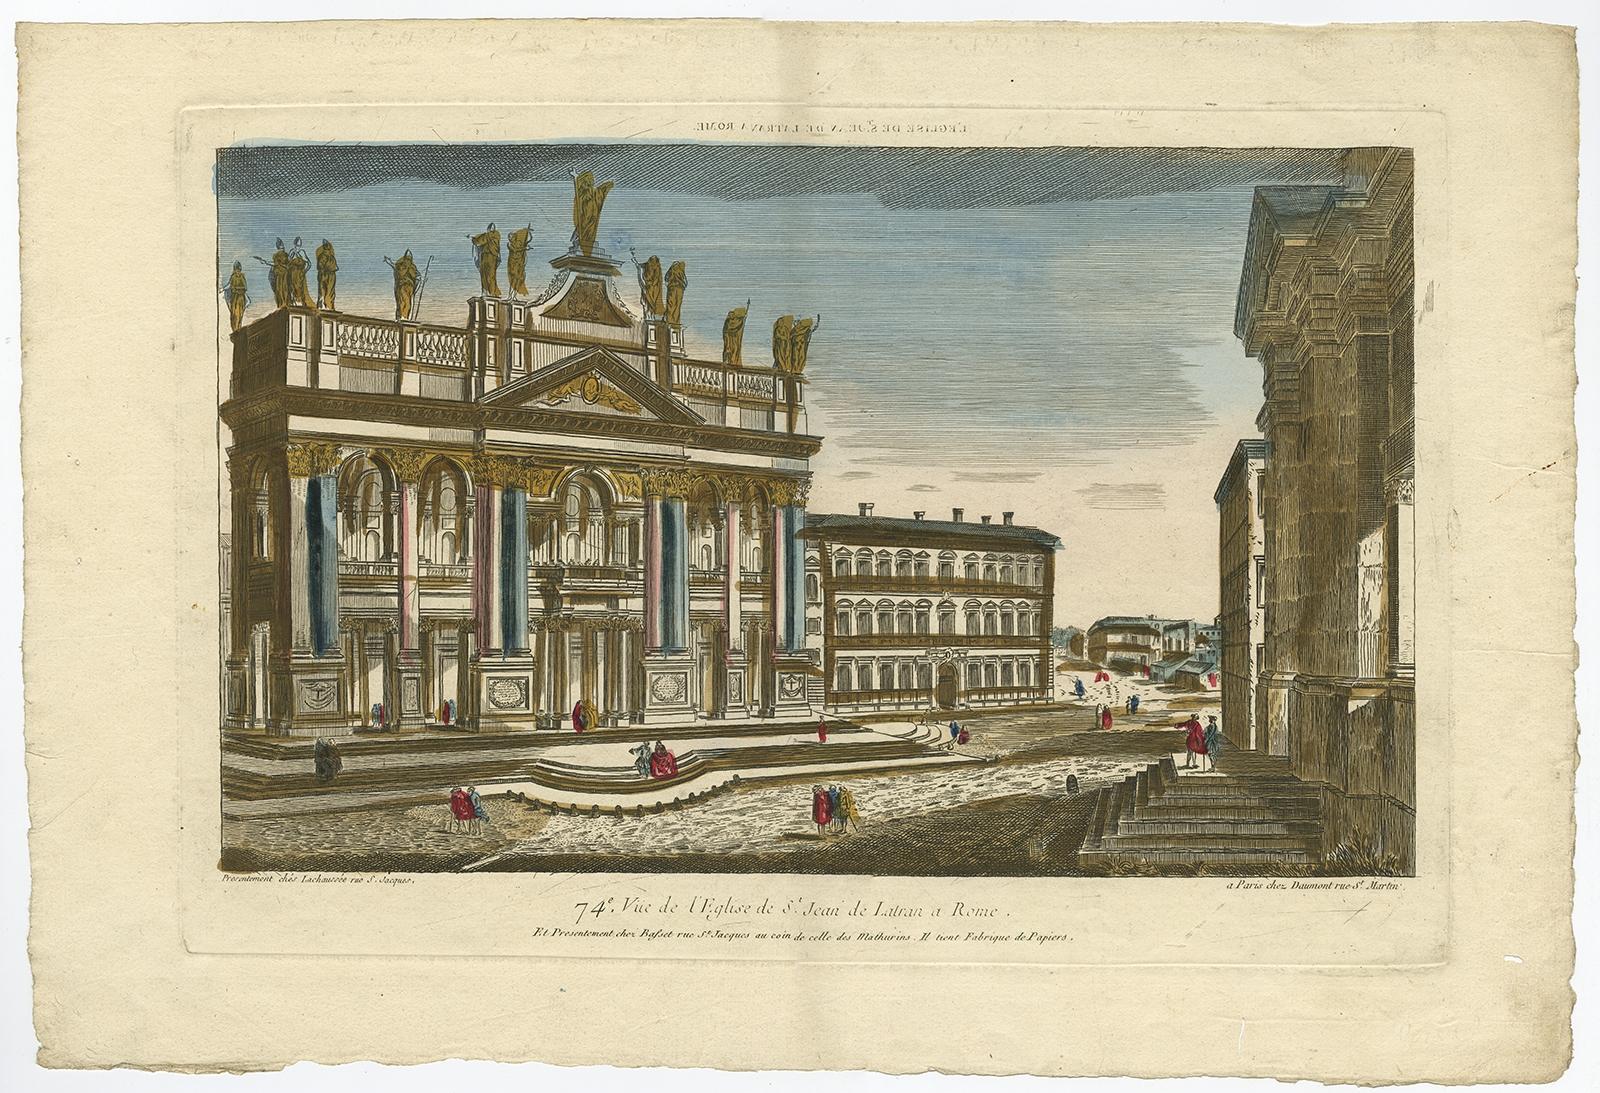 Antique print, titled: 'Vue de l'Eglise de St. Jean de Latran a Rome.' - View of the Archbasilica of St. John Lateran in Rome, Italy. This is an optical print, also called 'vue optique' or 'vue d'optique', which were made to be viewed through a